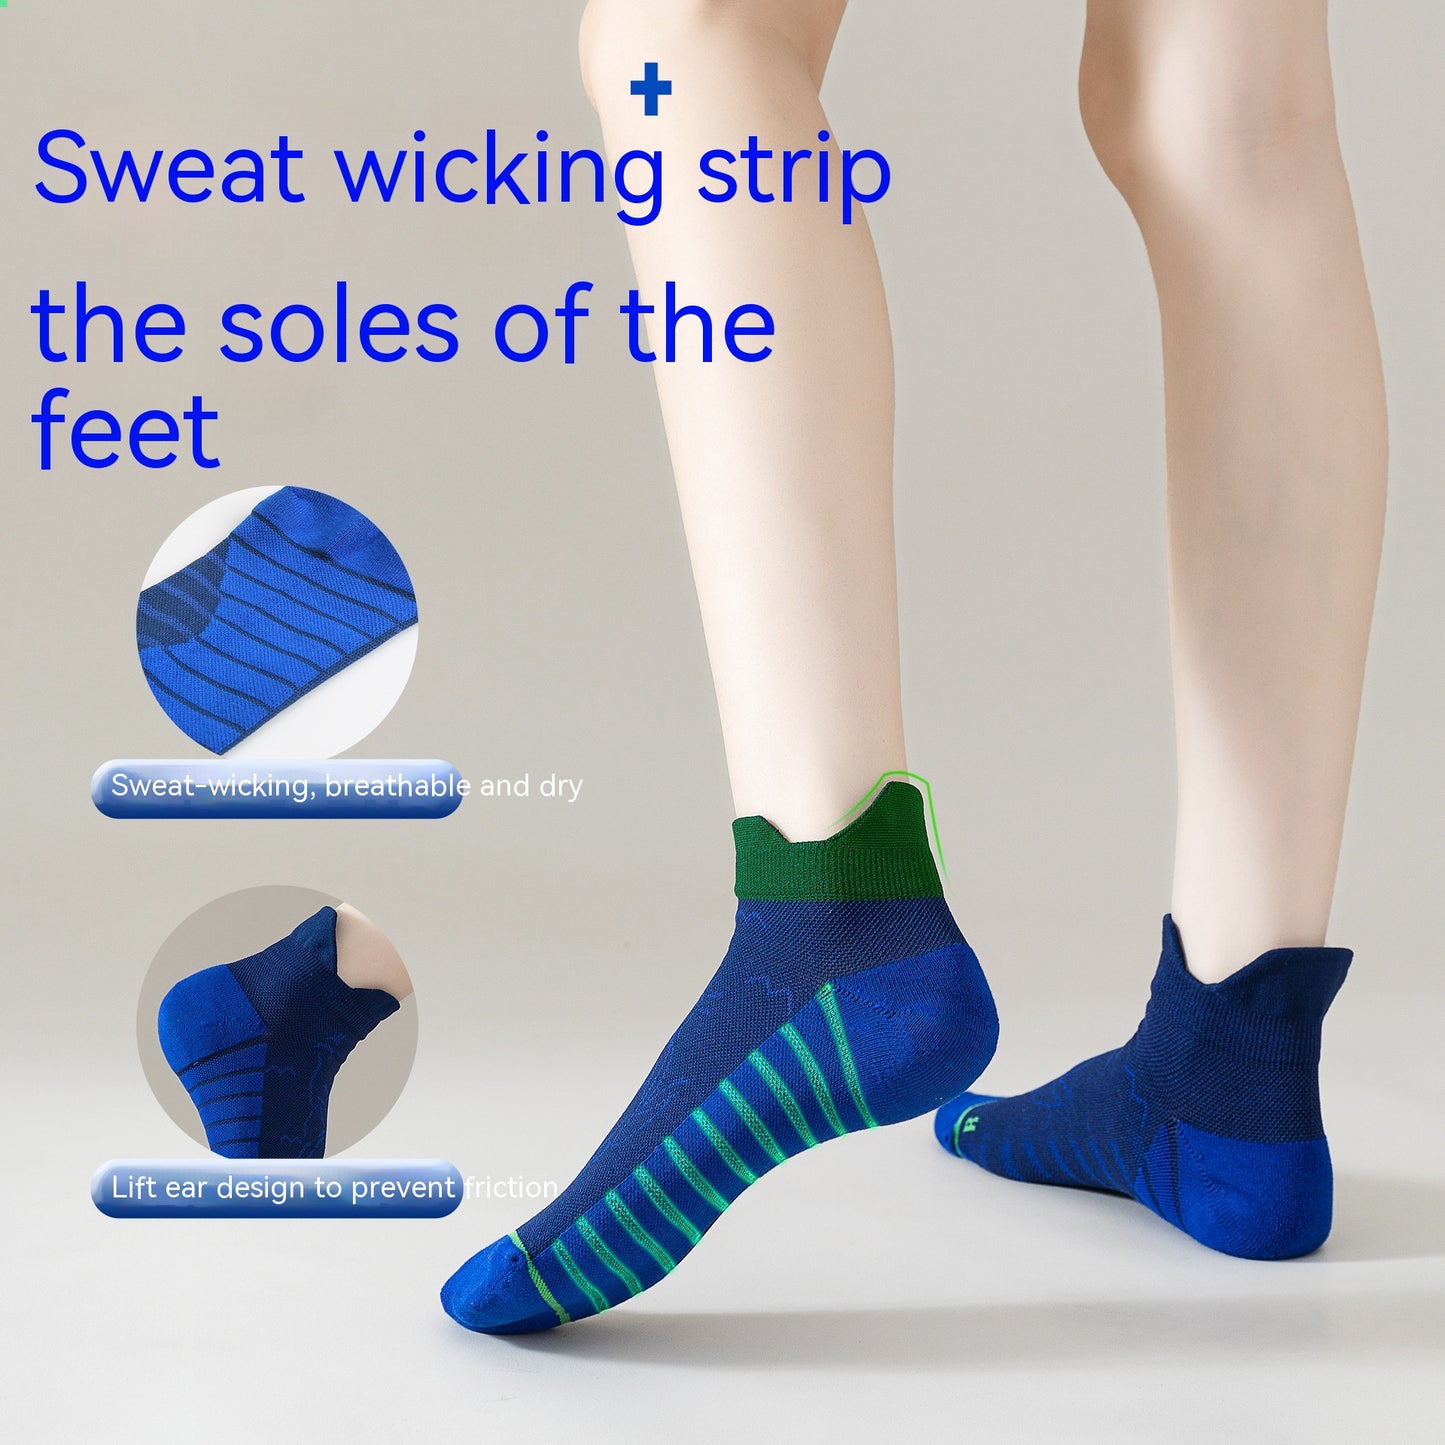 Non-Slip Outdoor Socks with Towel Bottom for Running Riding Breathable Sports